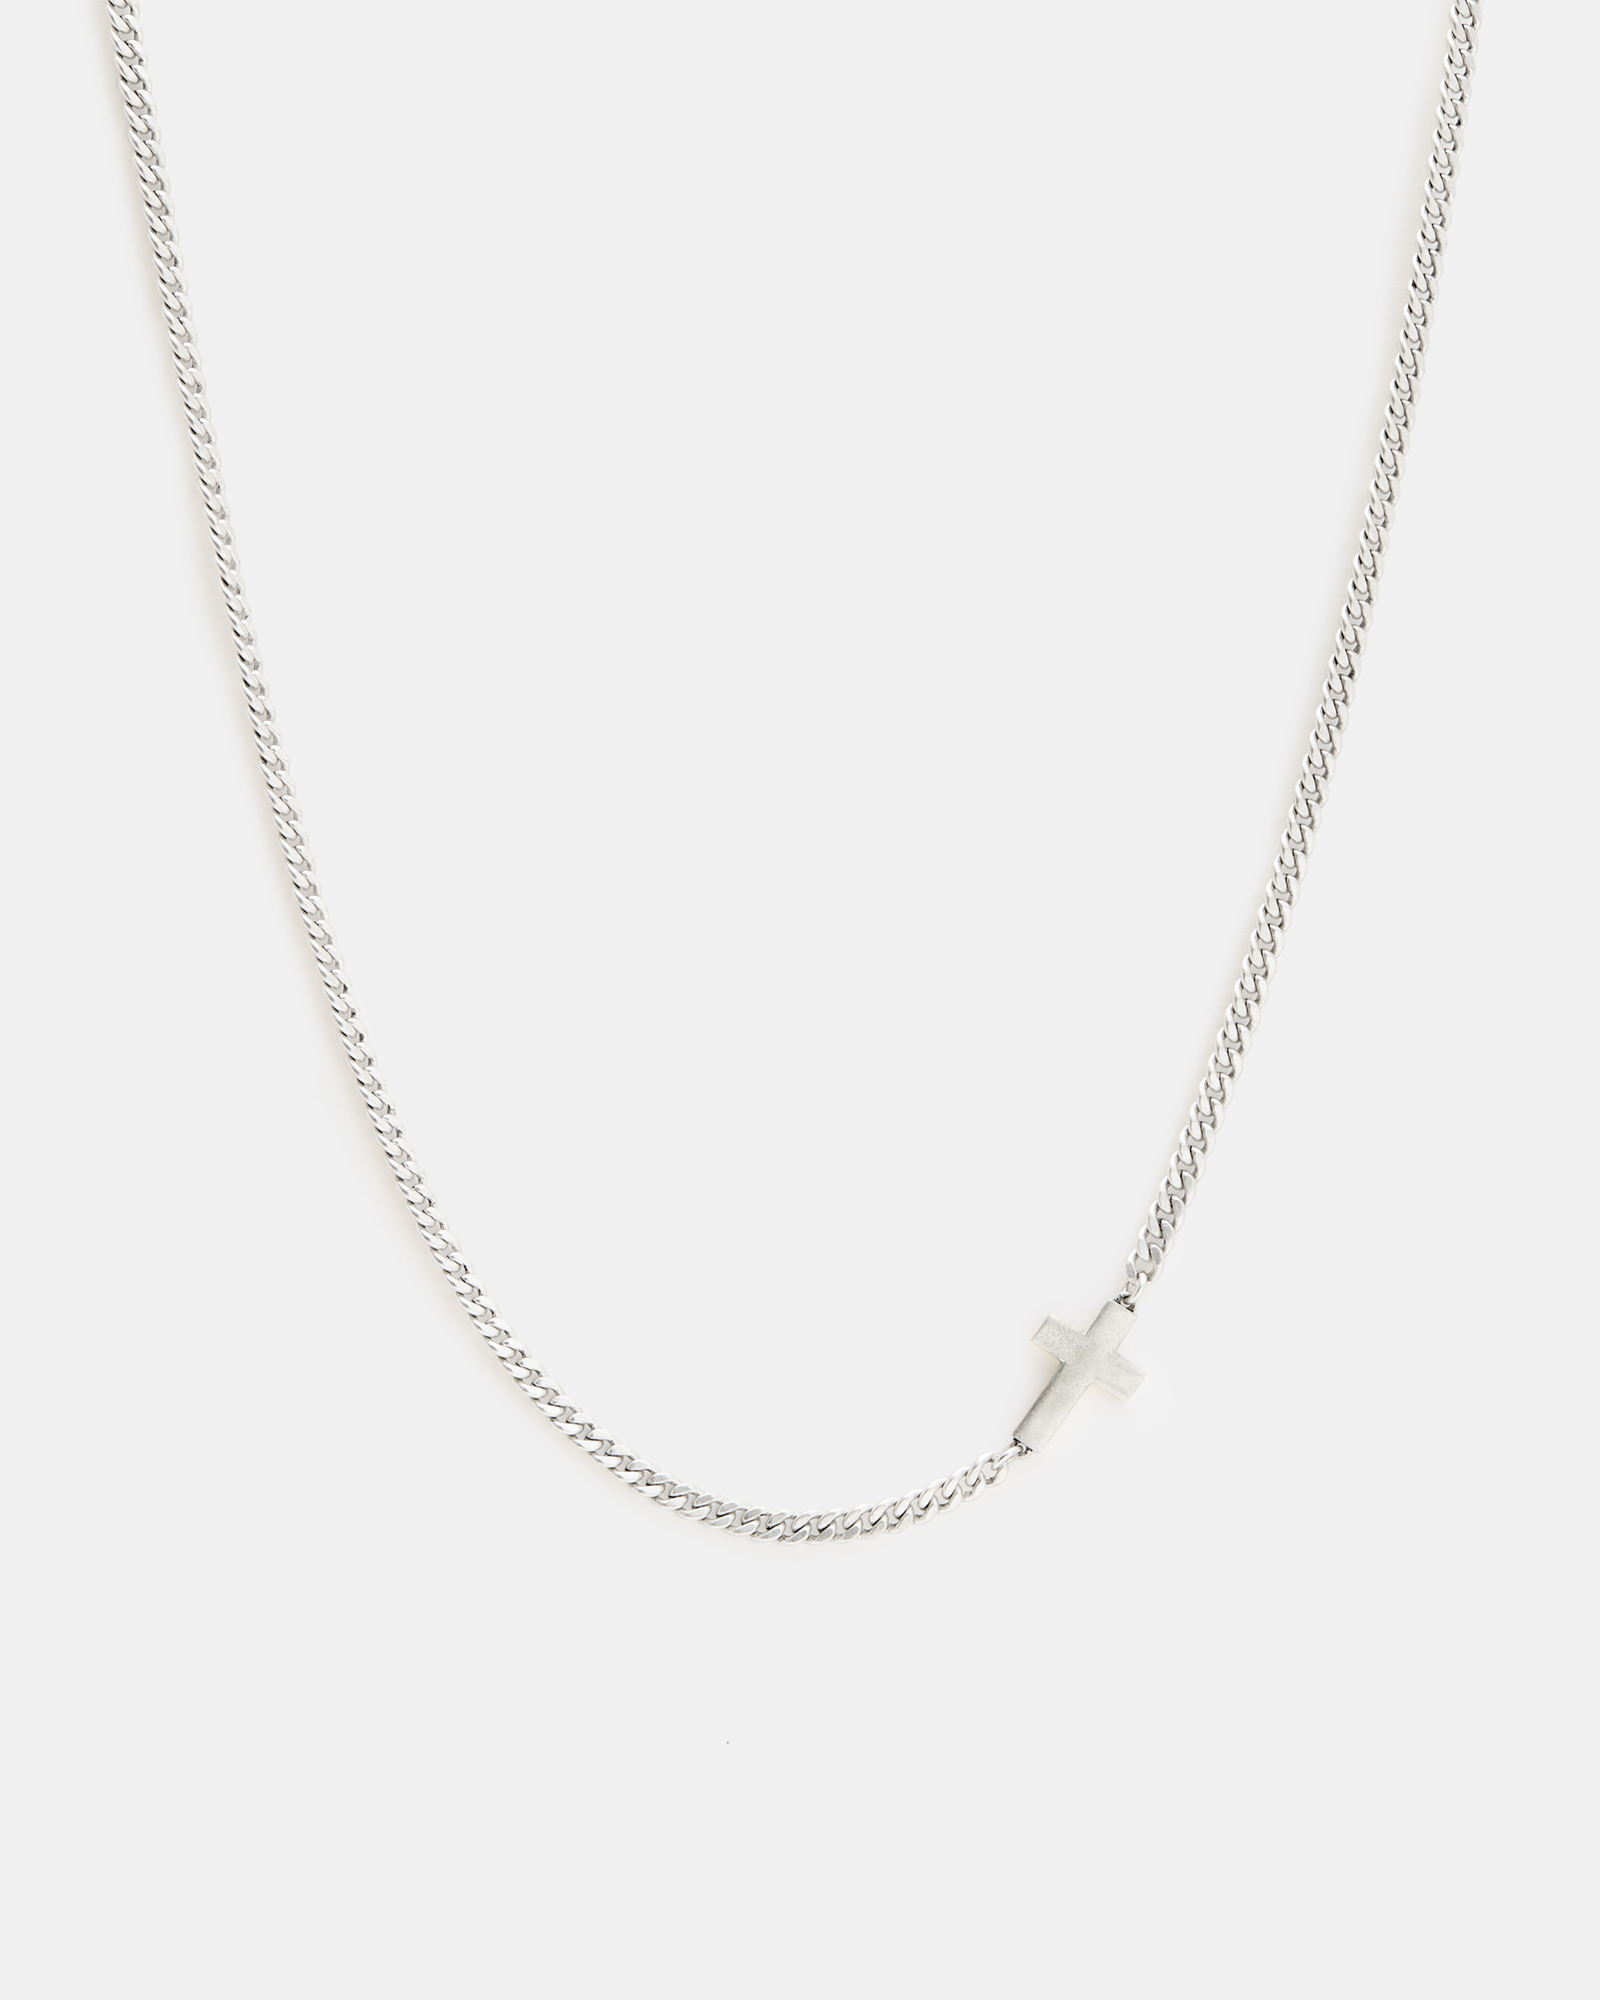 AllSaints Cross Sterling Silver Curb Chain Necklace,, WARM SILVER